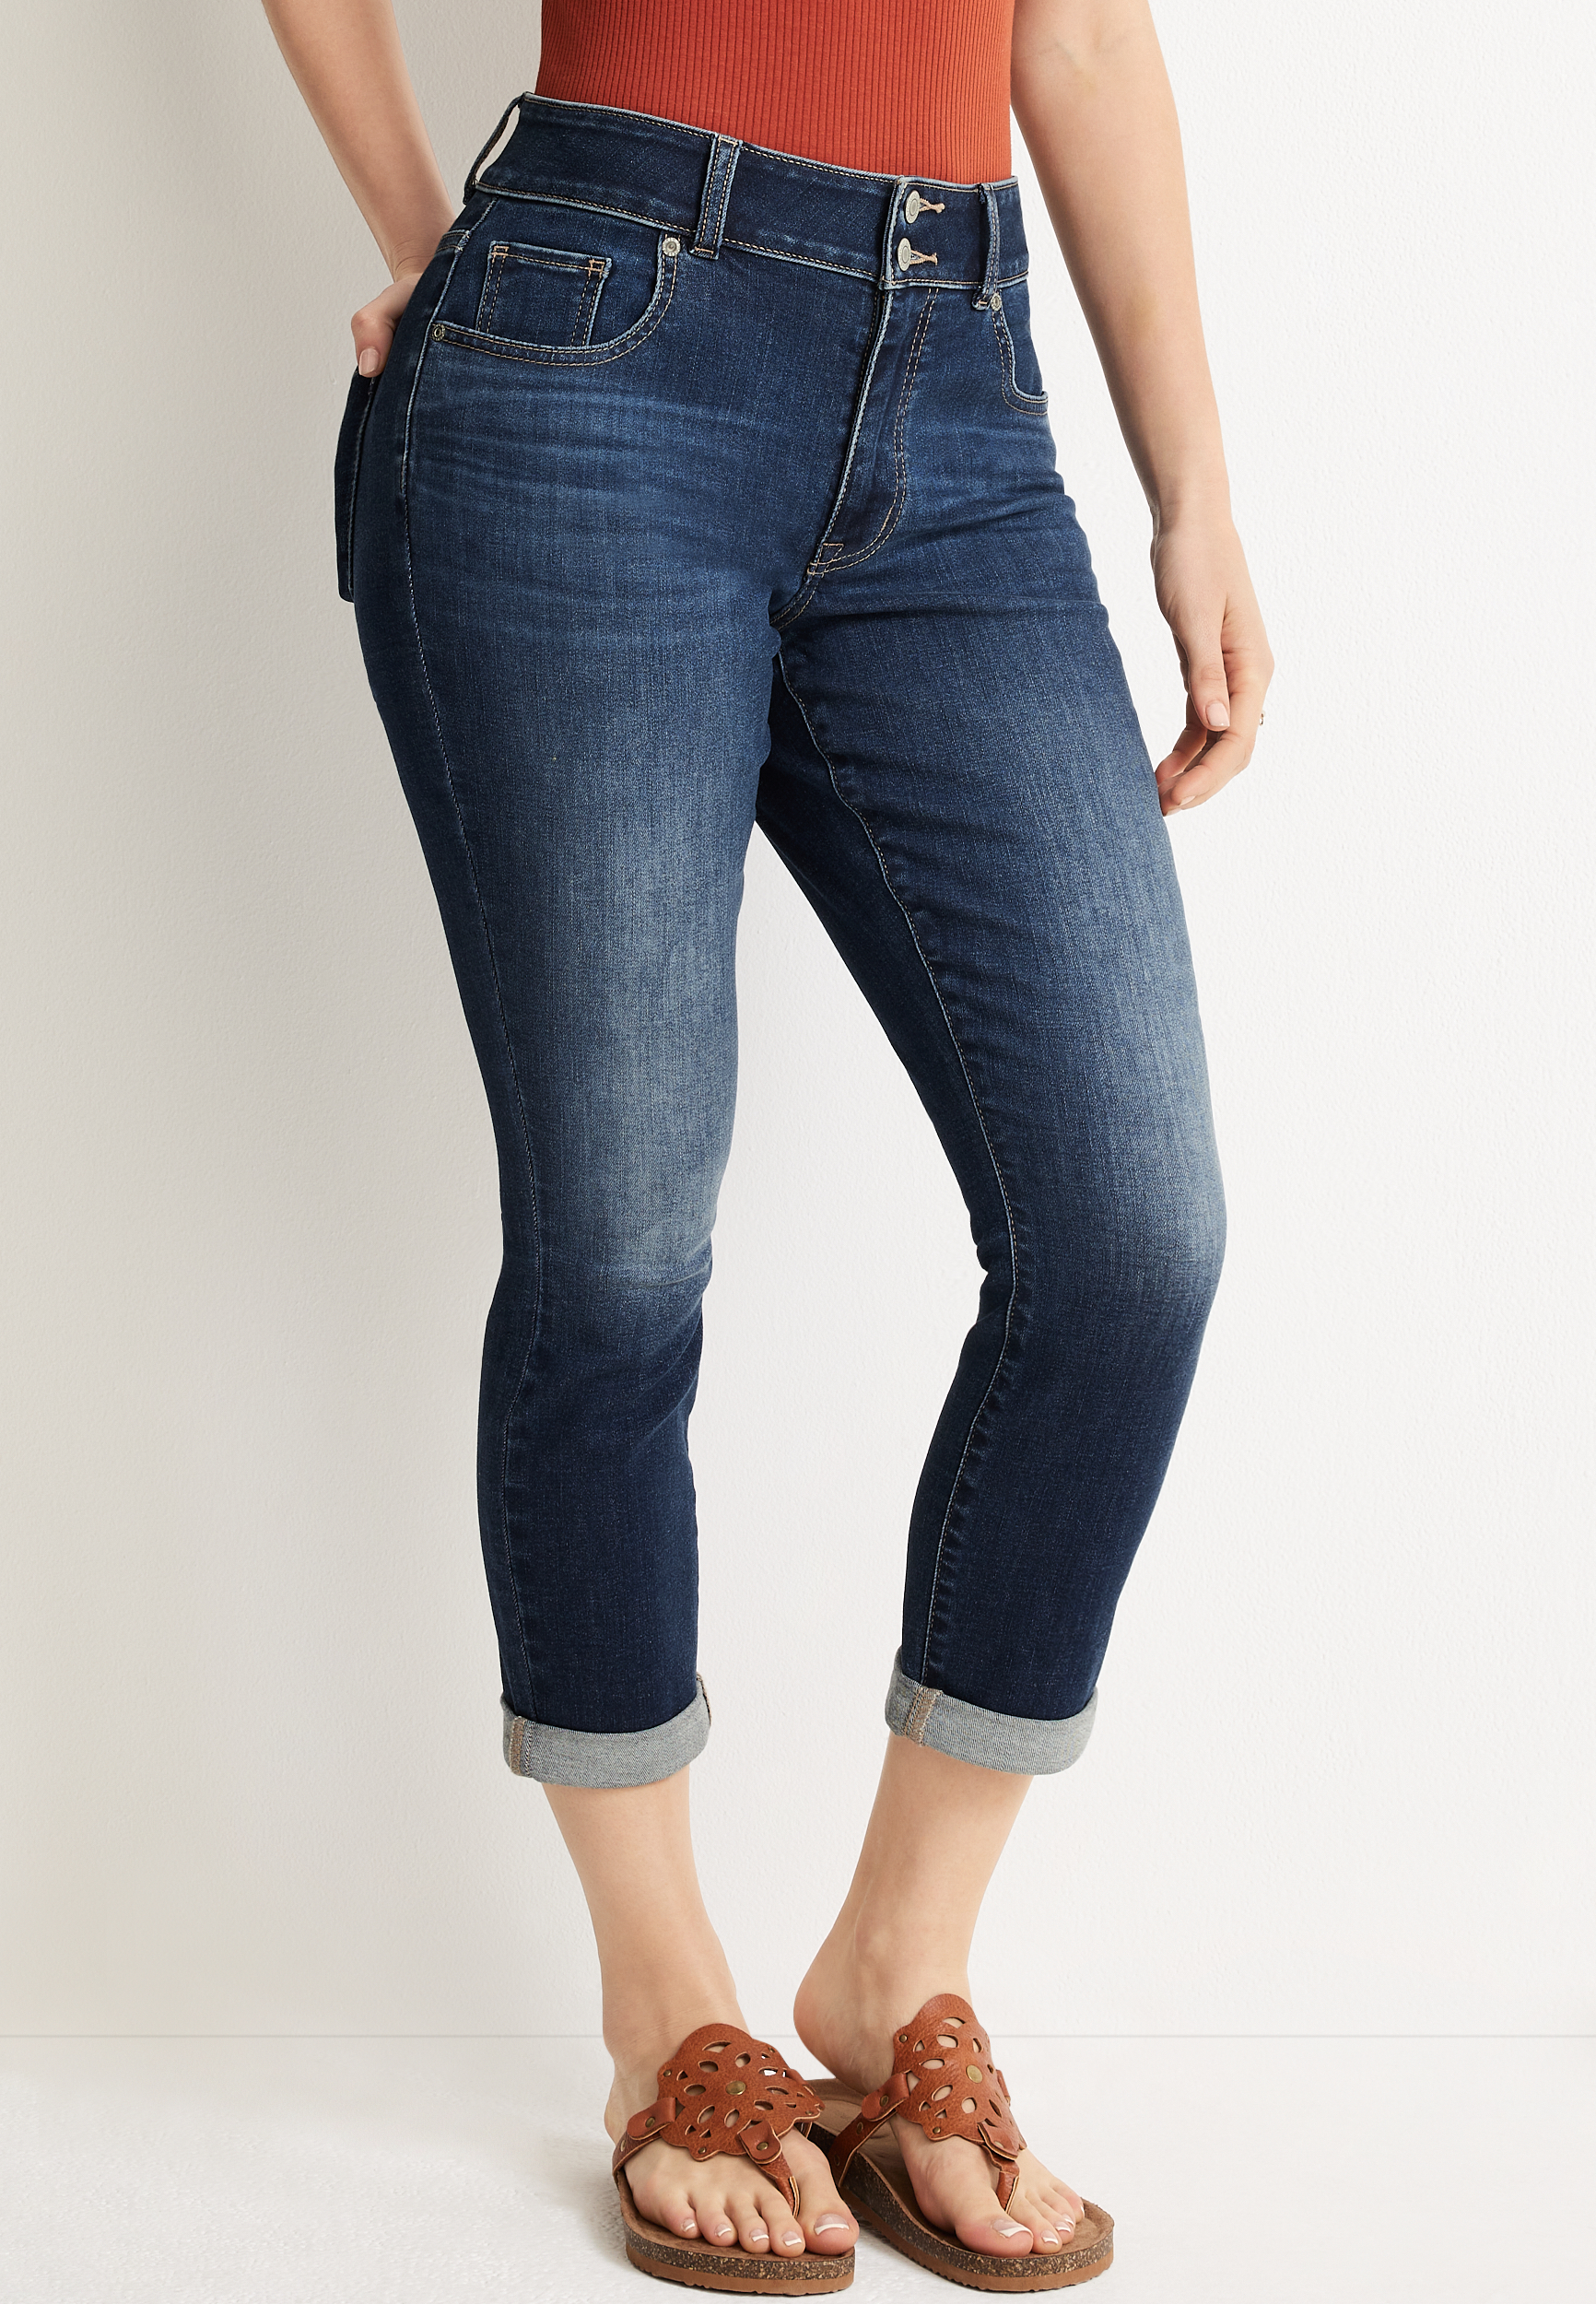 m jeans by maurices™ Cool Comfort Curvy High Rise Cropped Jean | maurices